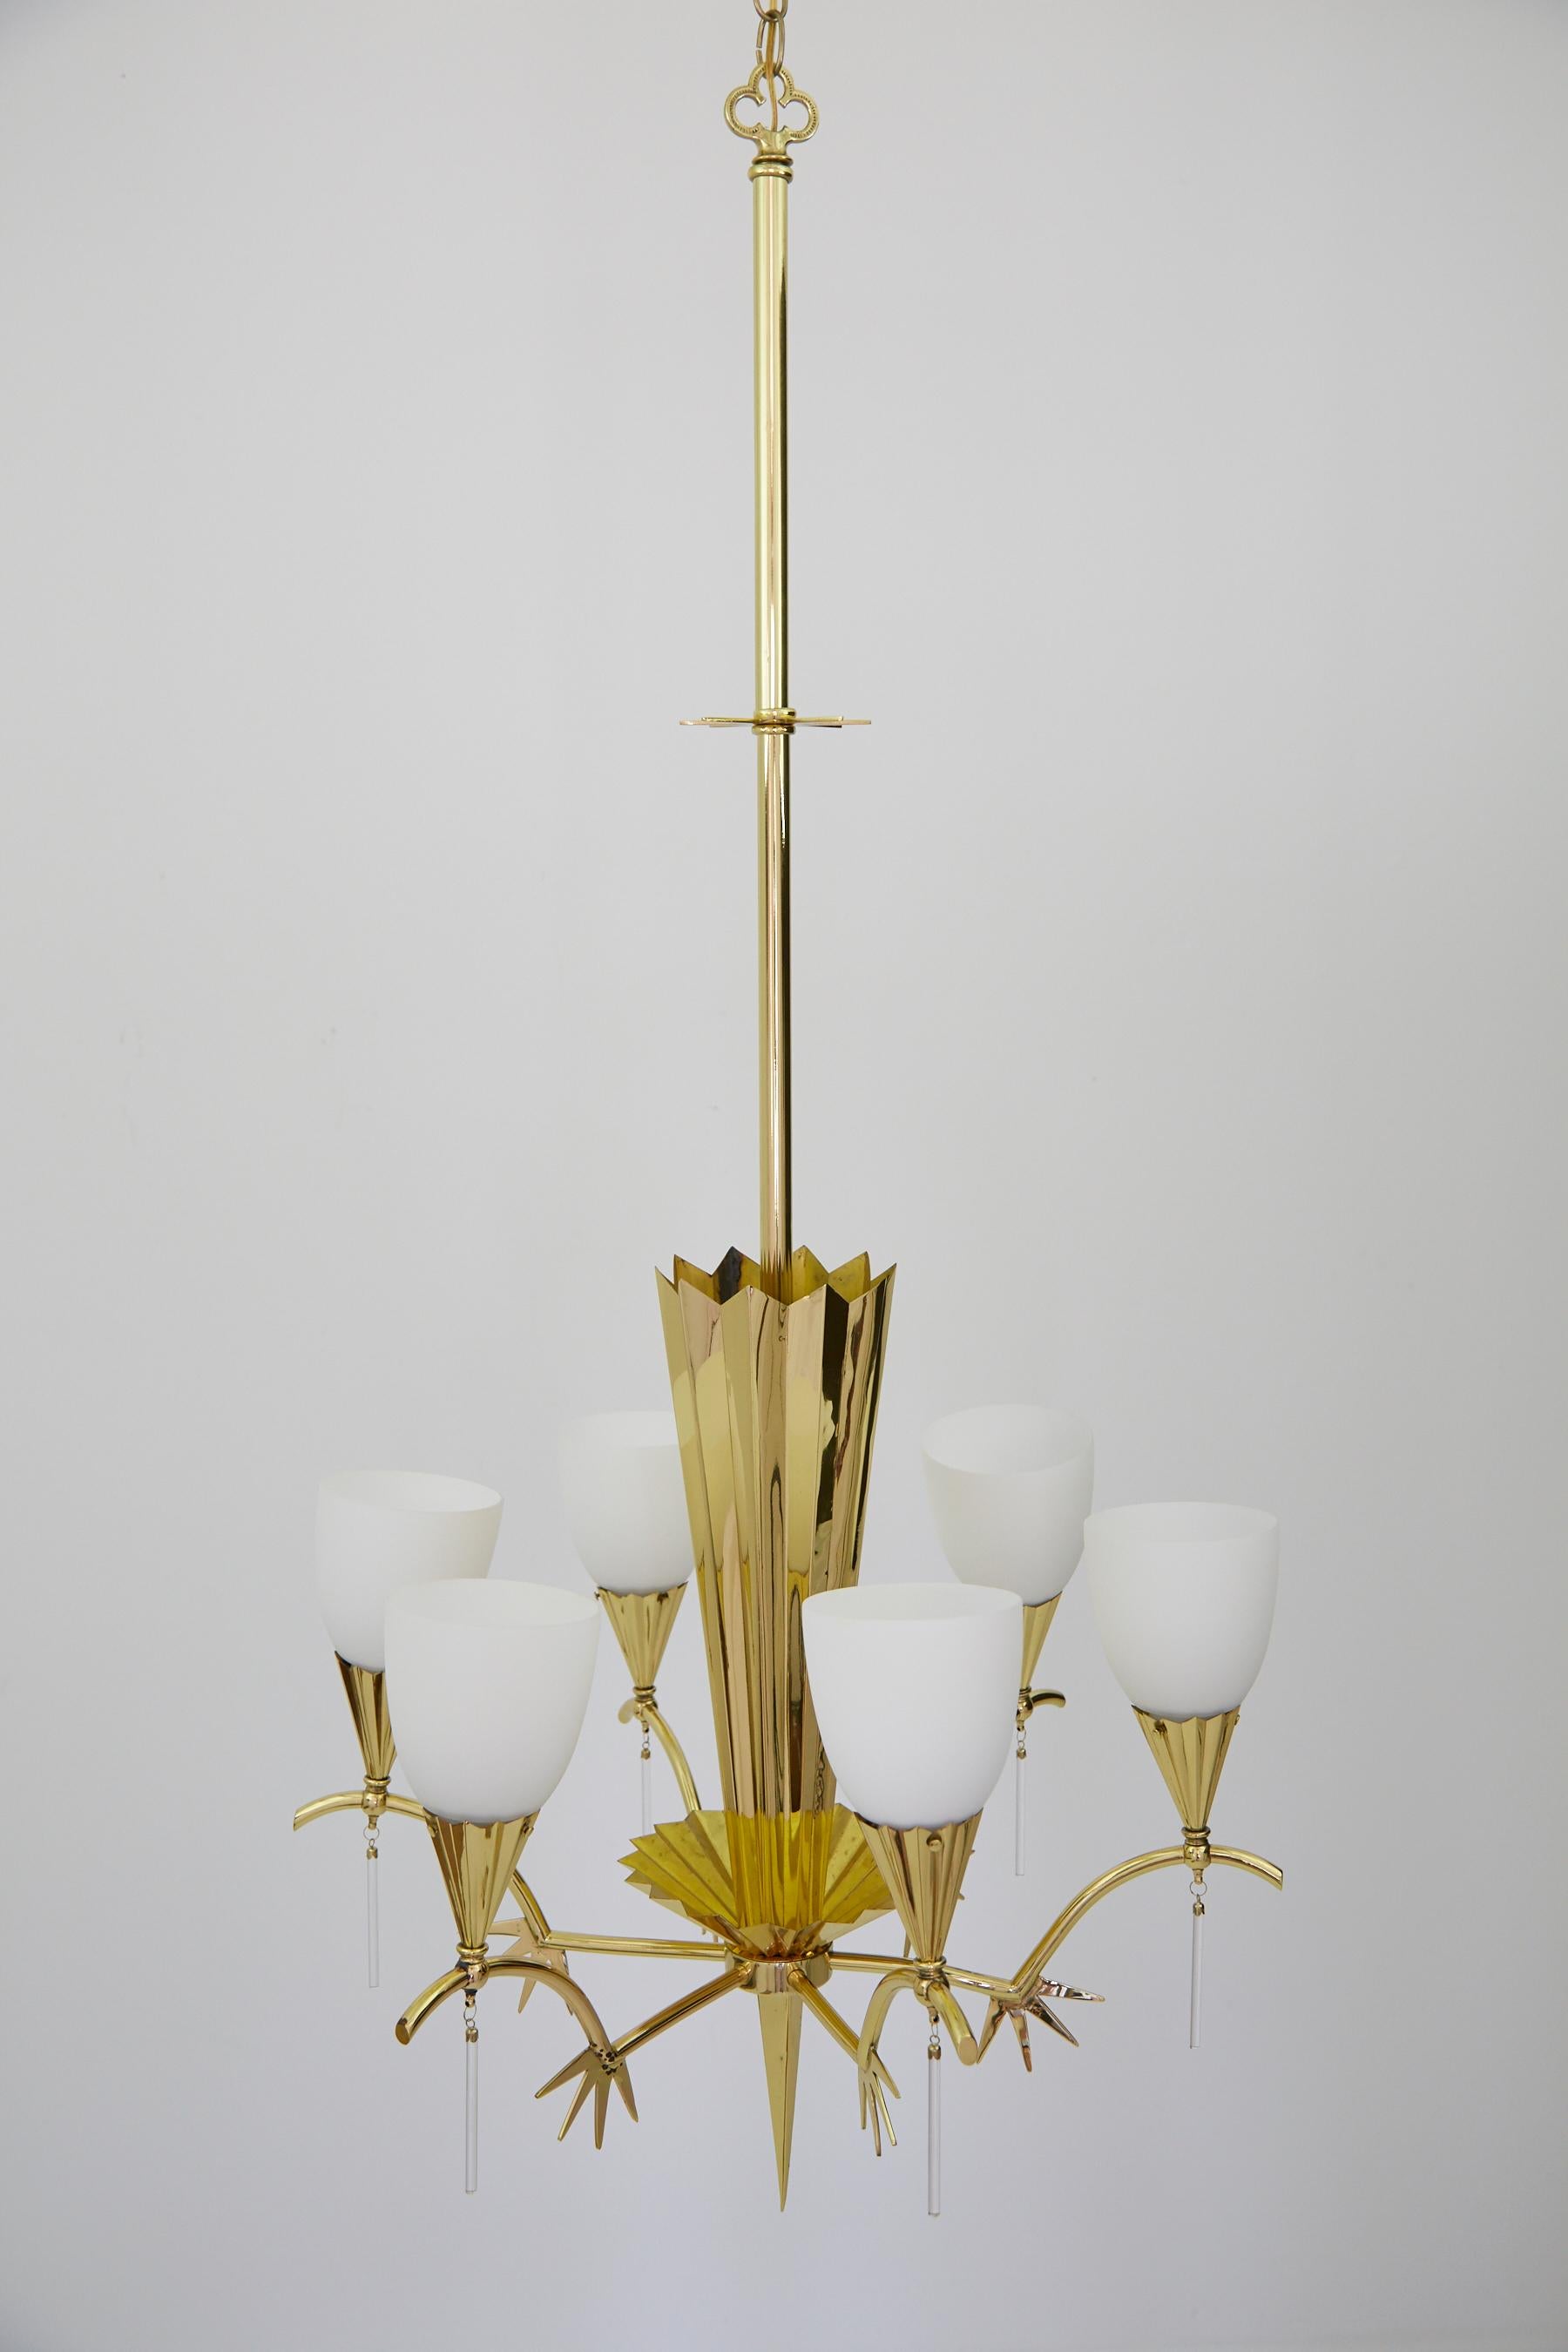 Six-Arm Italian Brass Chandelier with Decorative Spikes, 1940s For Sale 11